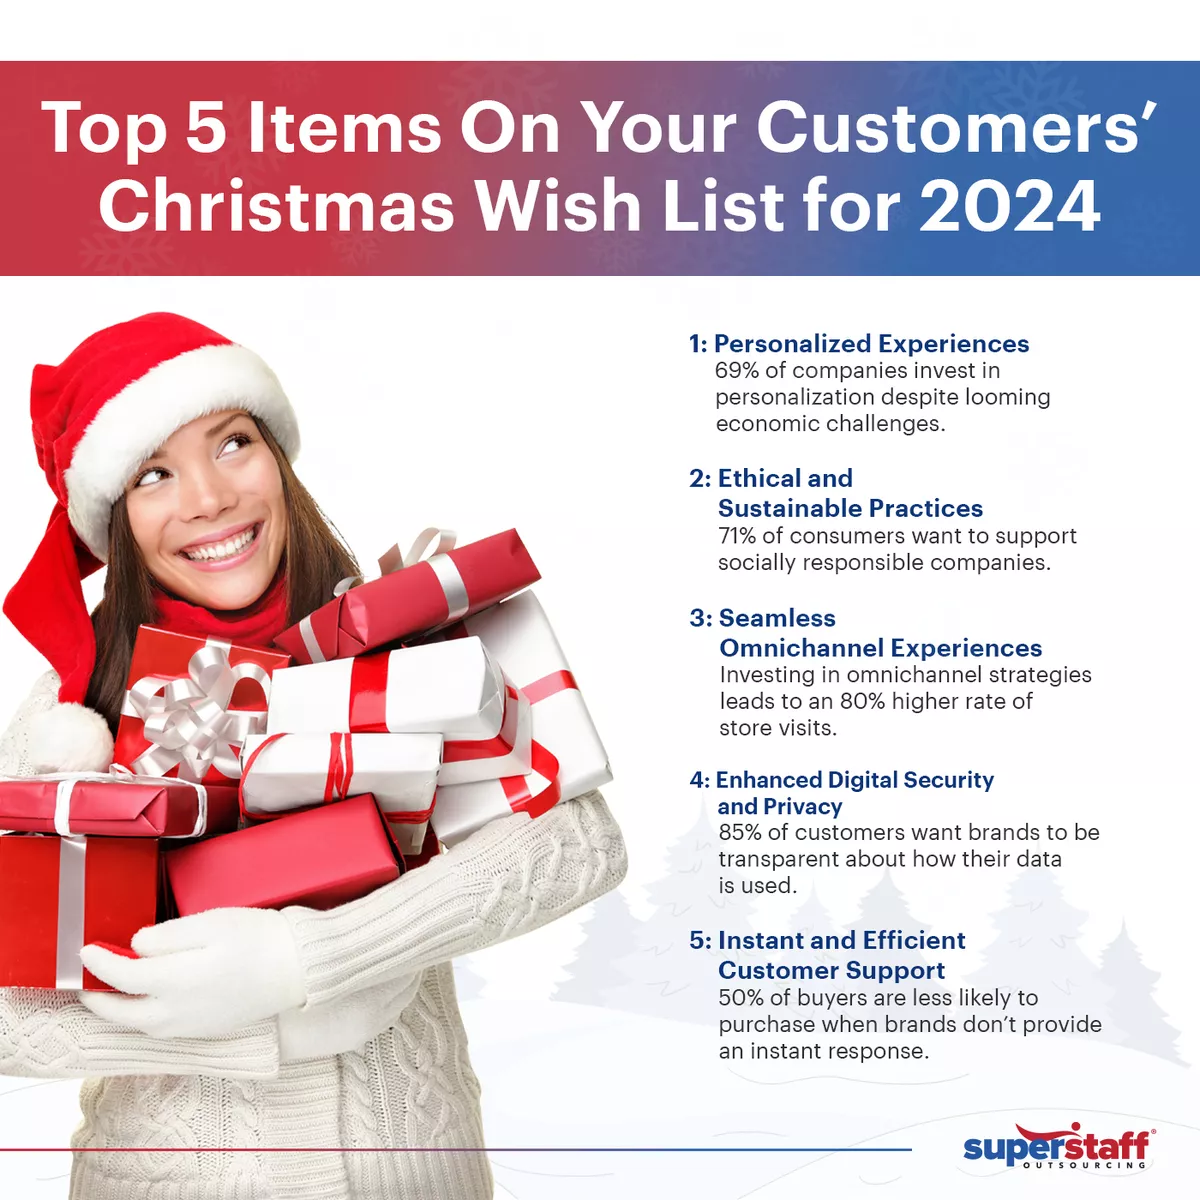 A girl in Santa customer holds several gifts. The mini infographic says: Top 5 Items On Your Customers' Christmas Wish Lift for 2024